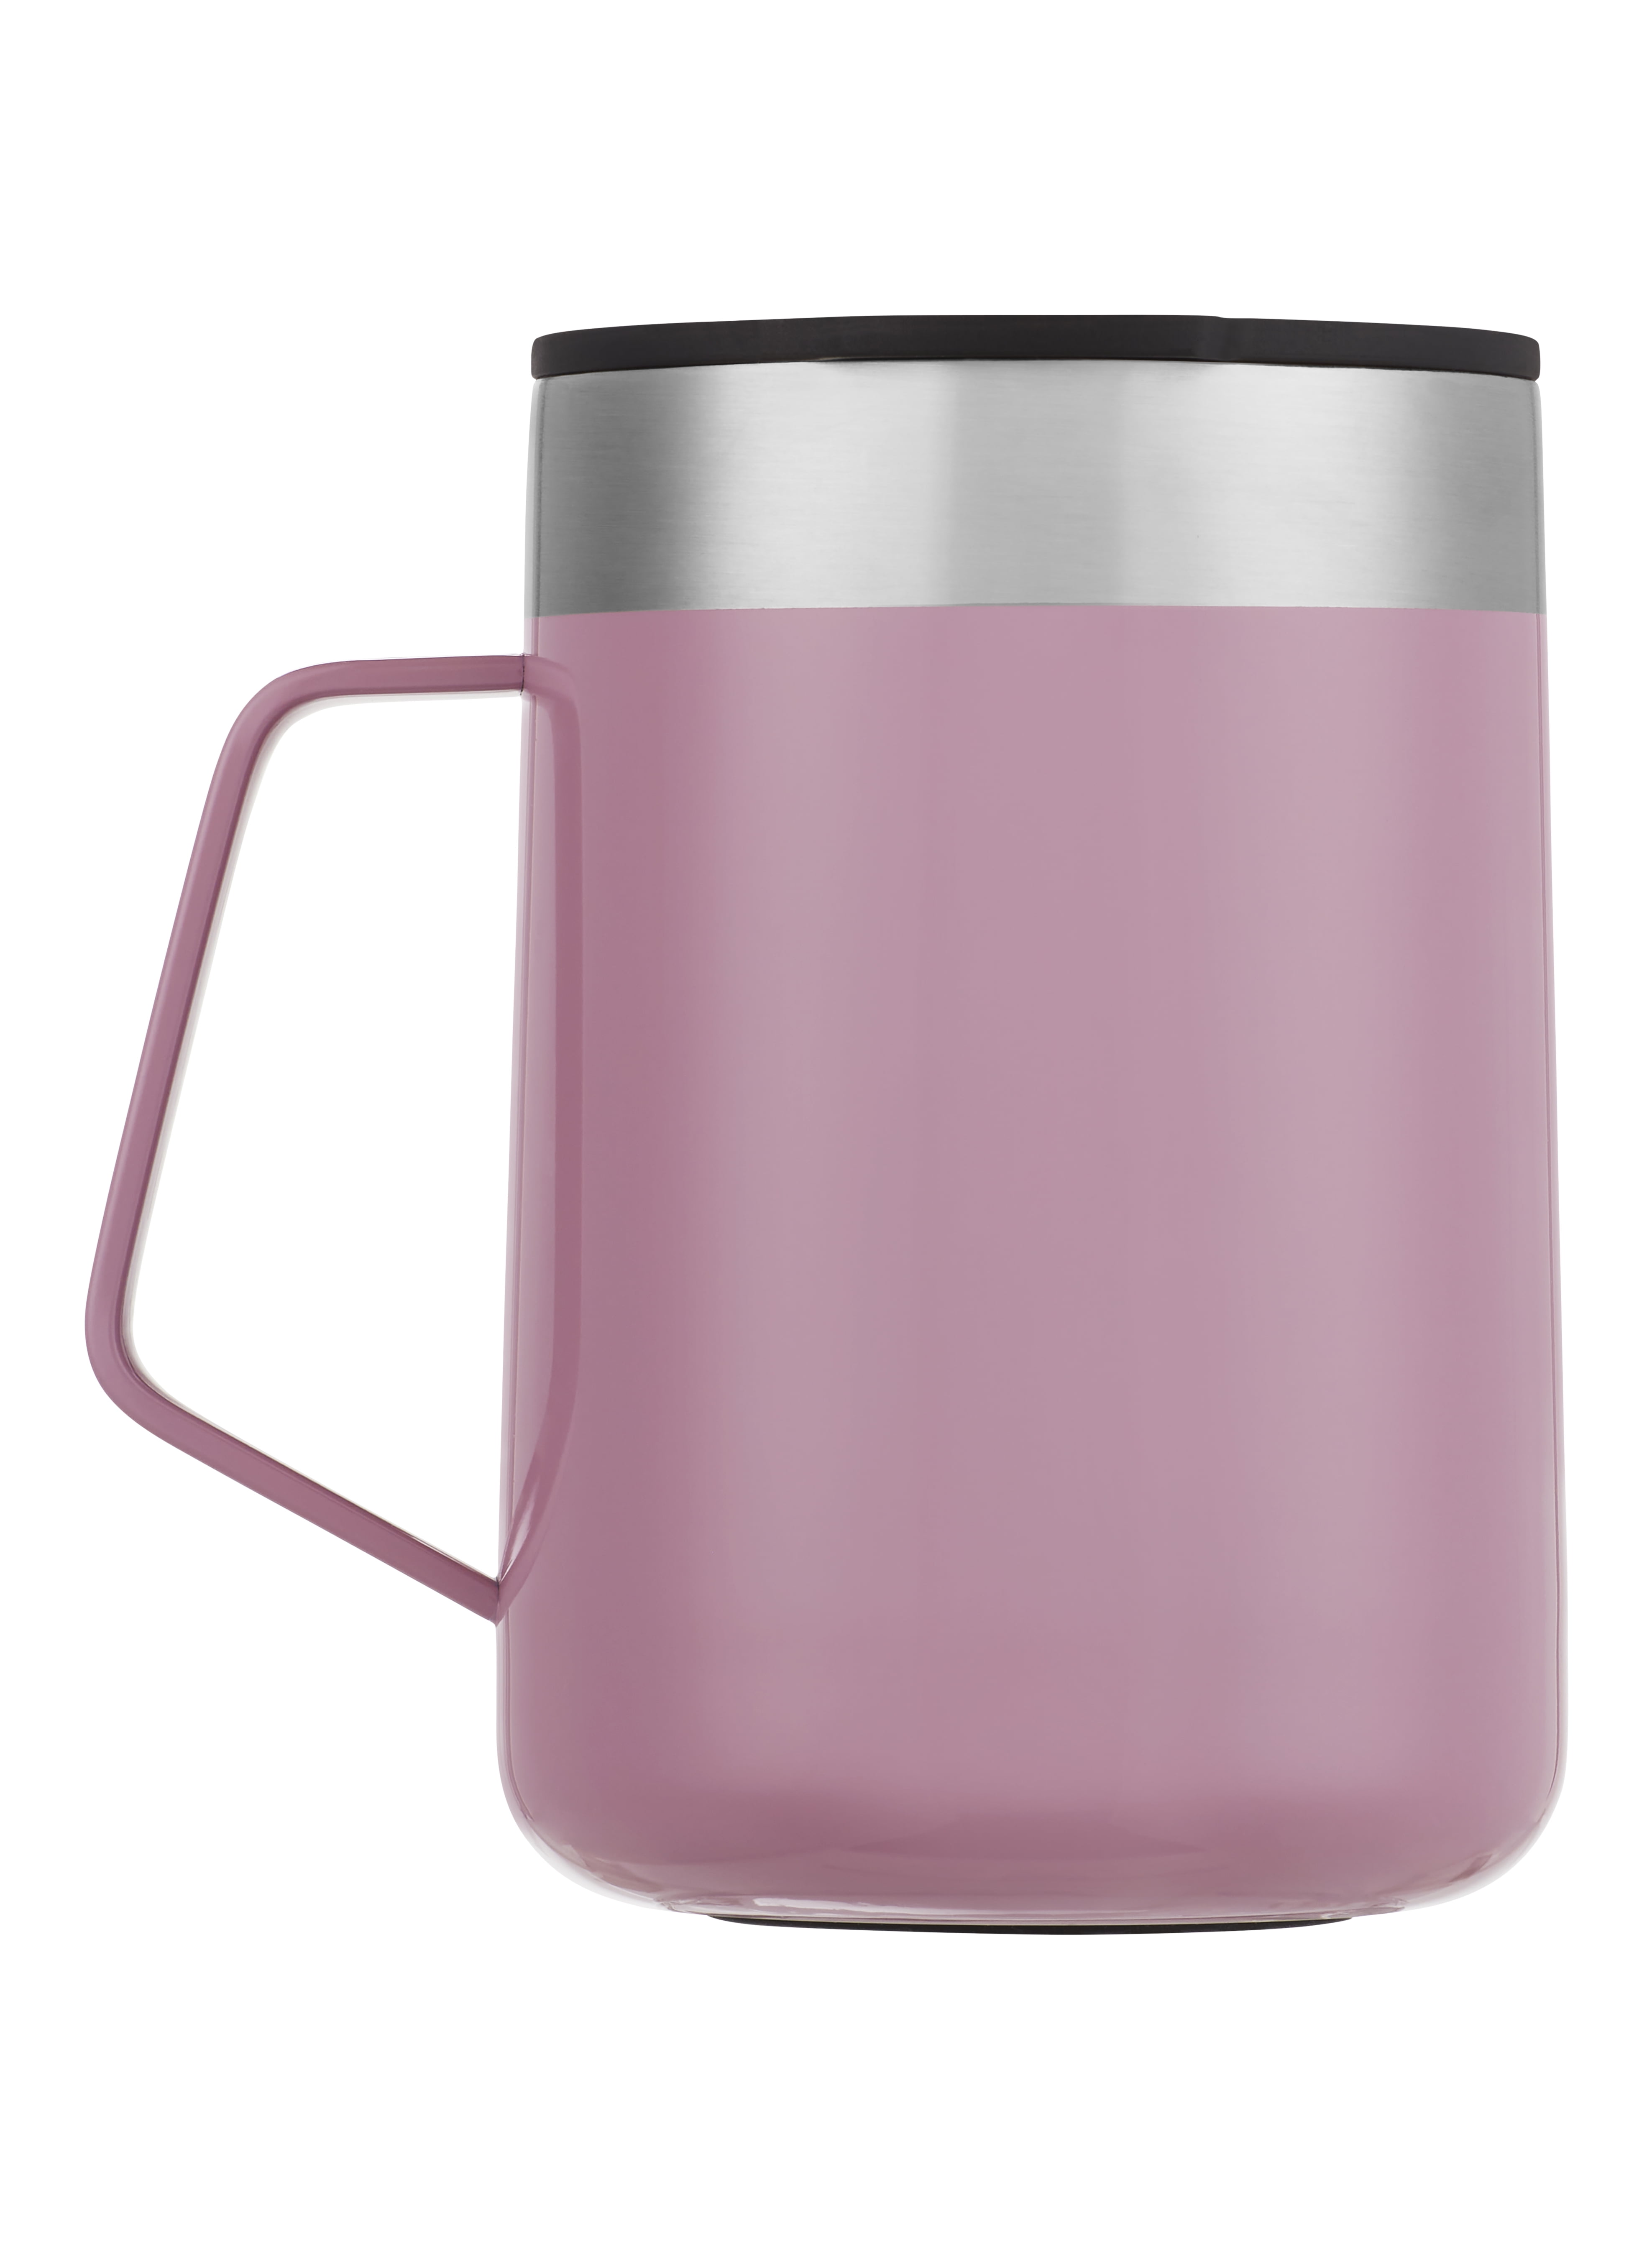 Contigo® Streeterville Stainless Steel Mug with Handle, 14 oz - Fry's Food  Stores